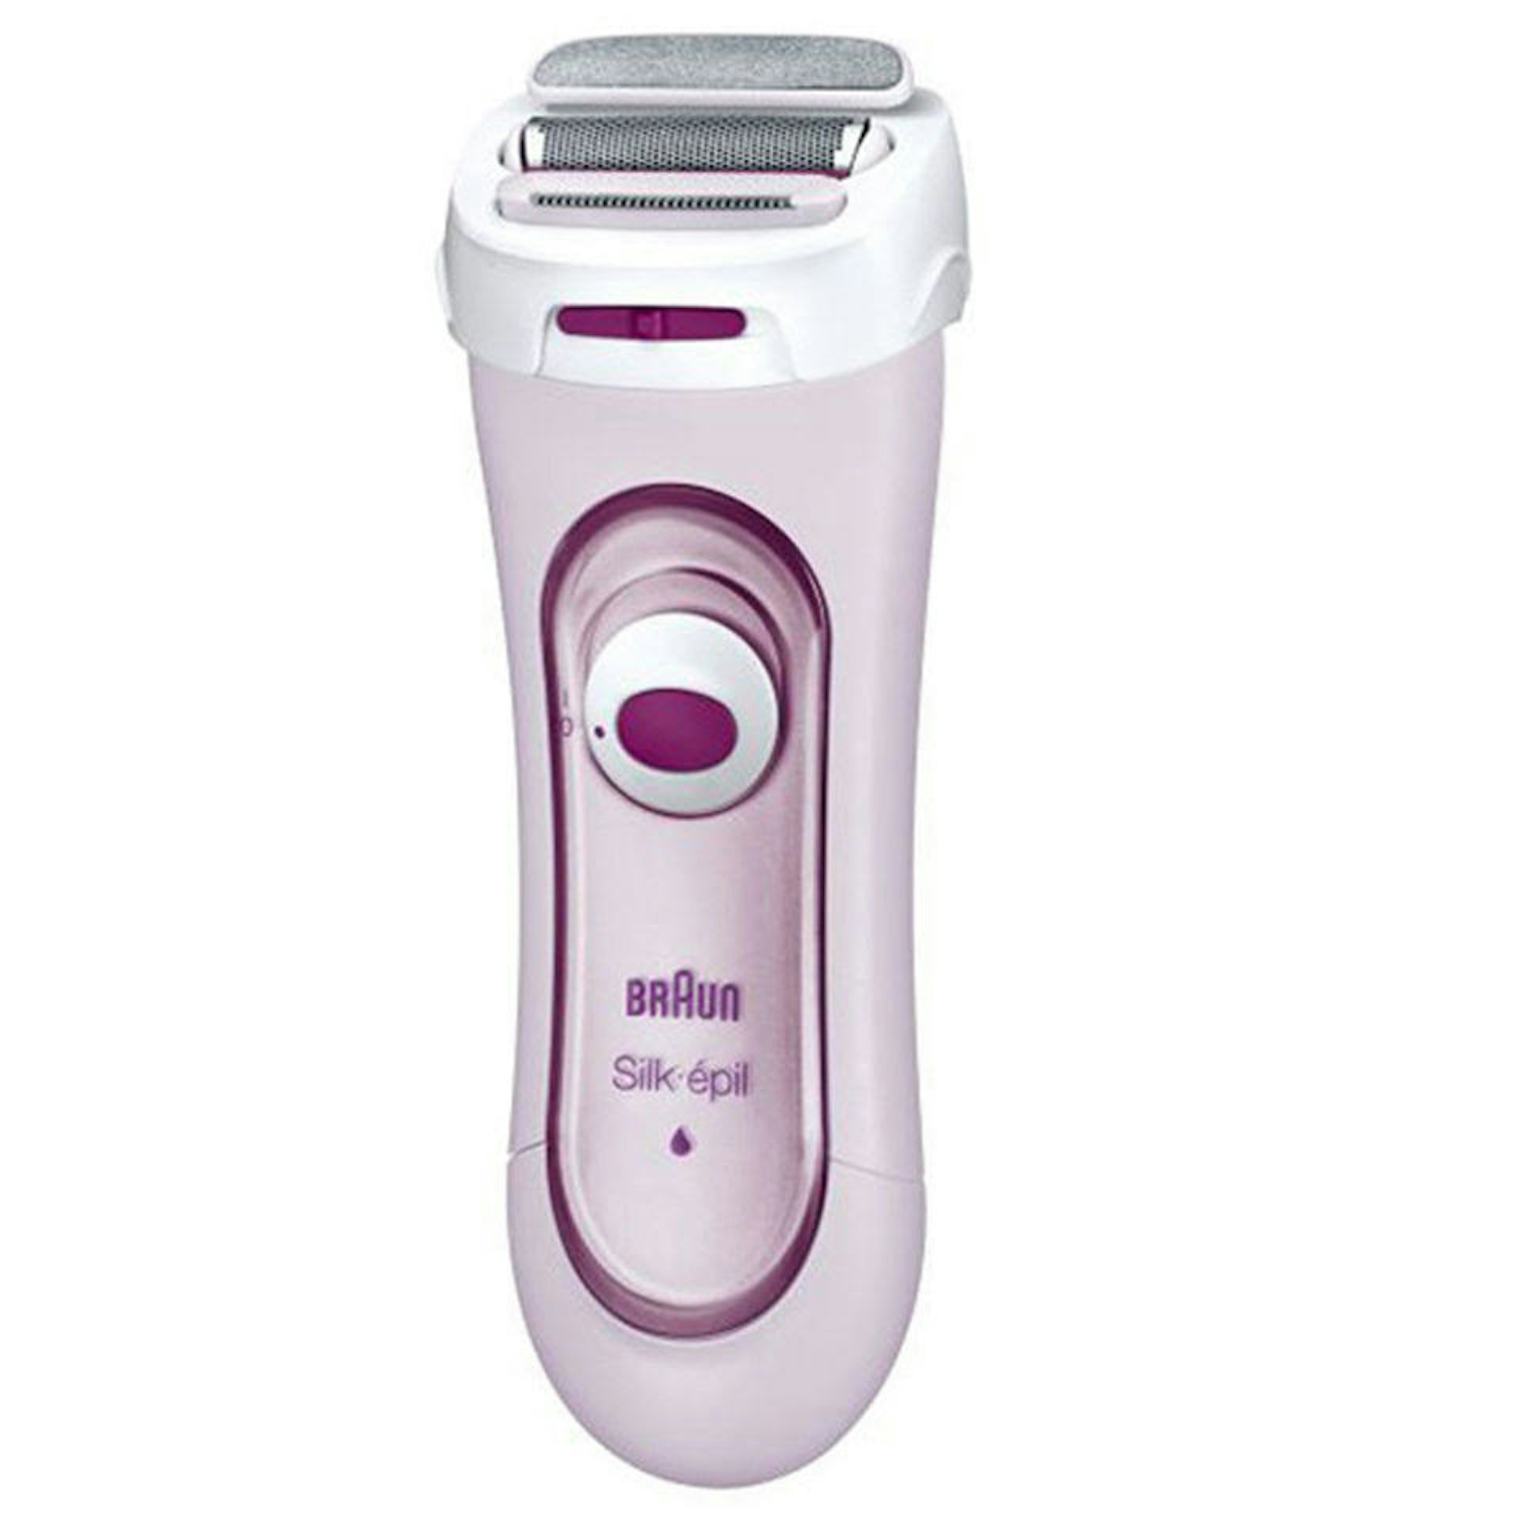 5 Best Electric Razors For Women When A Disposable Razor Won't Do